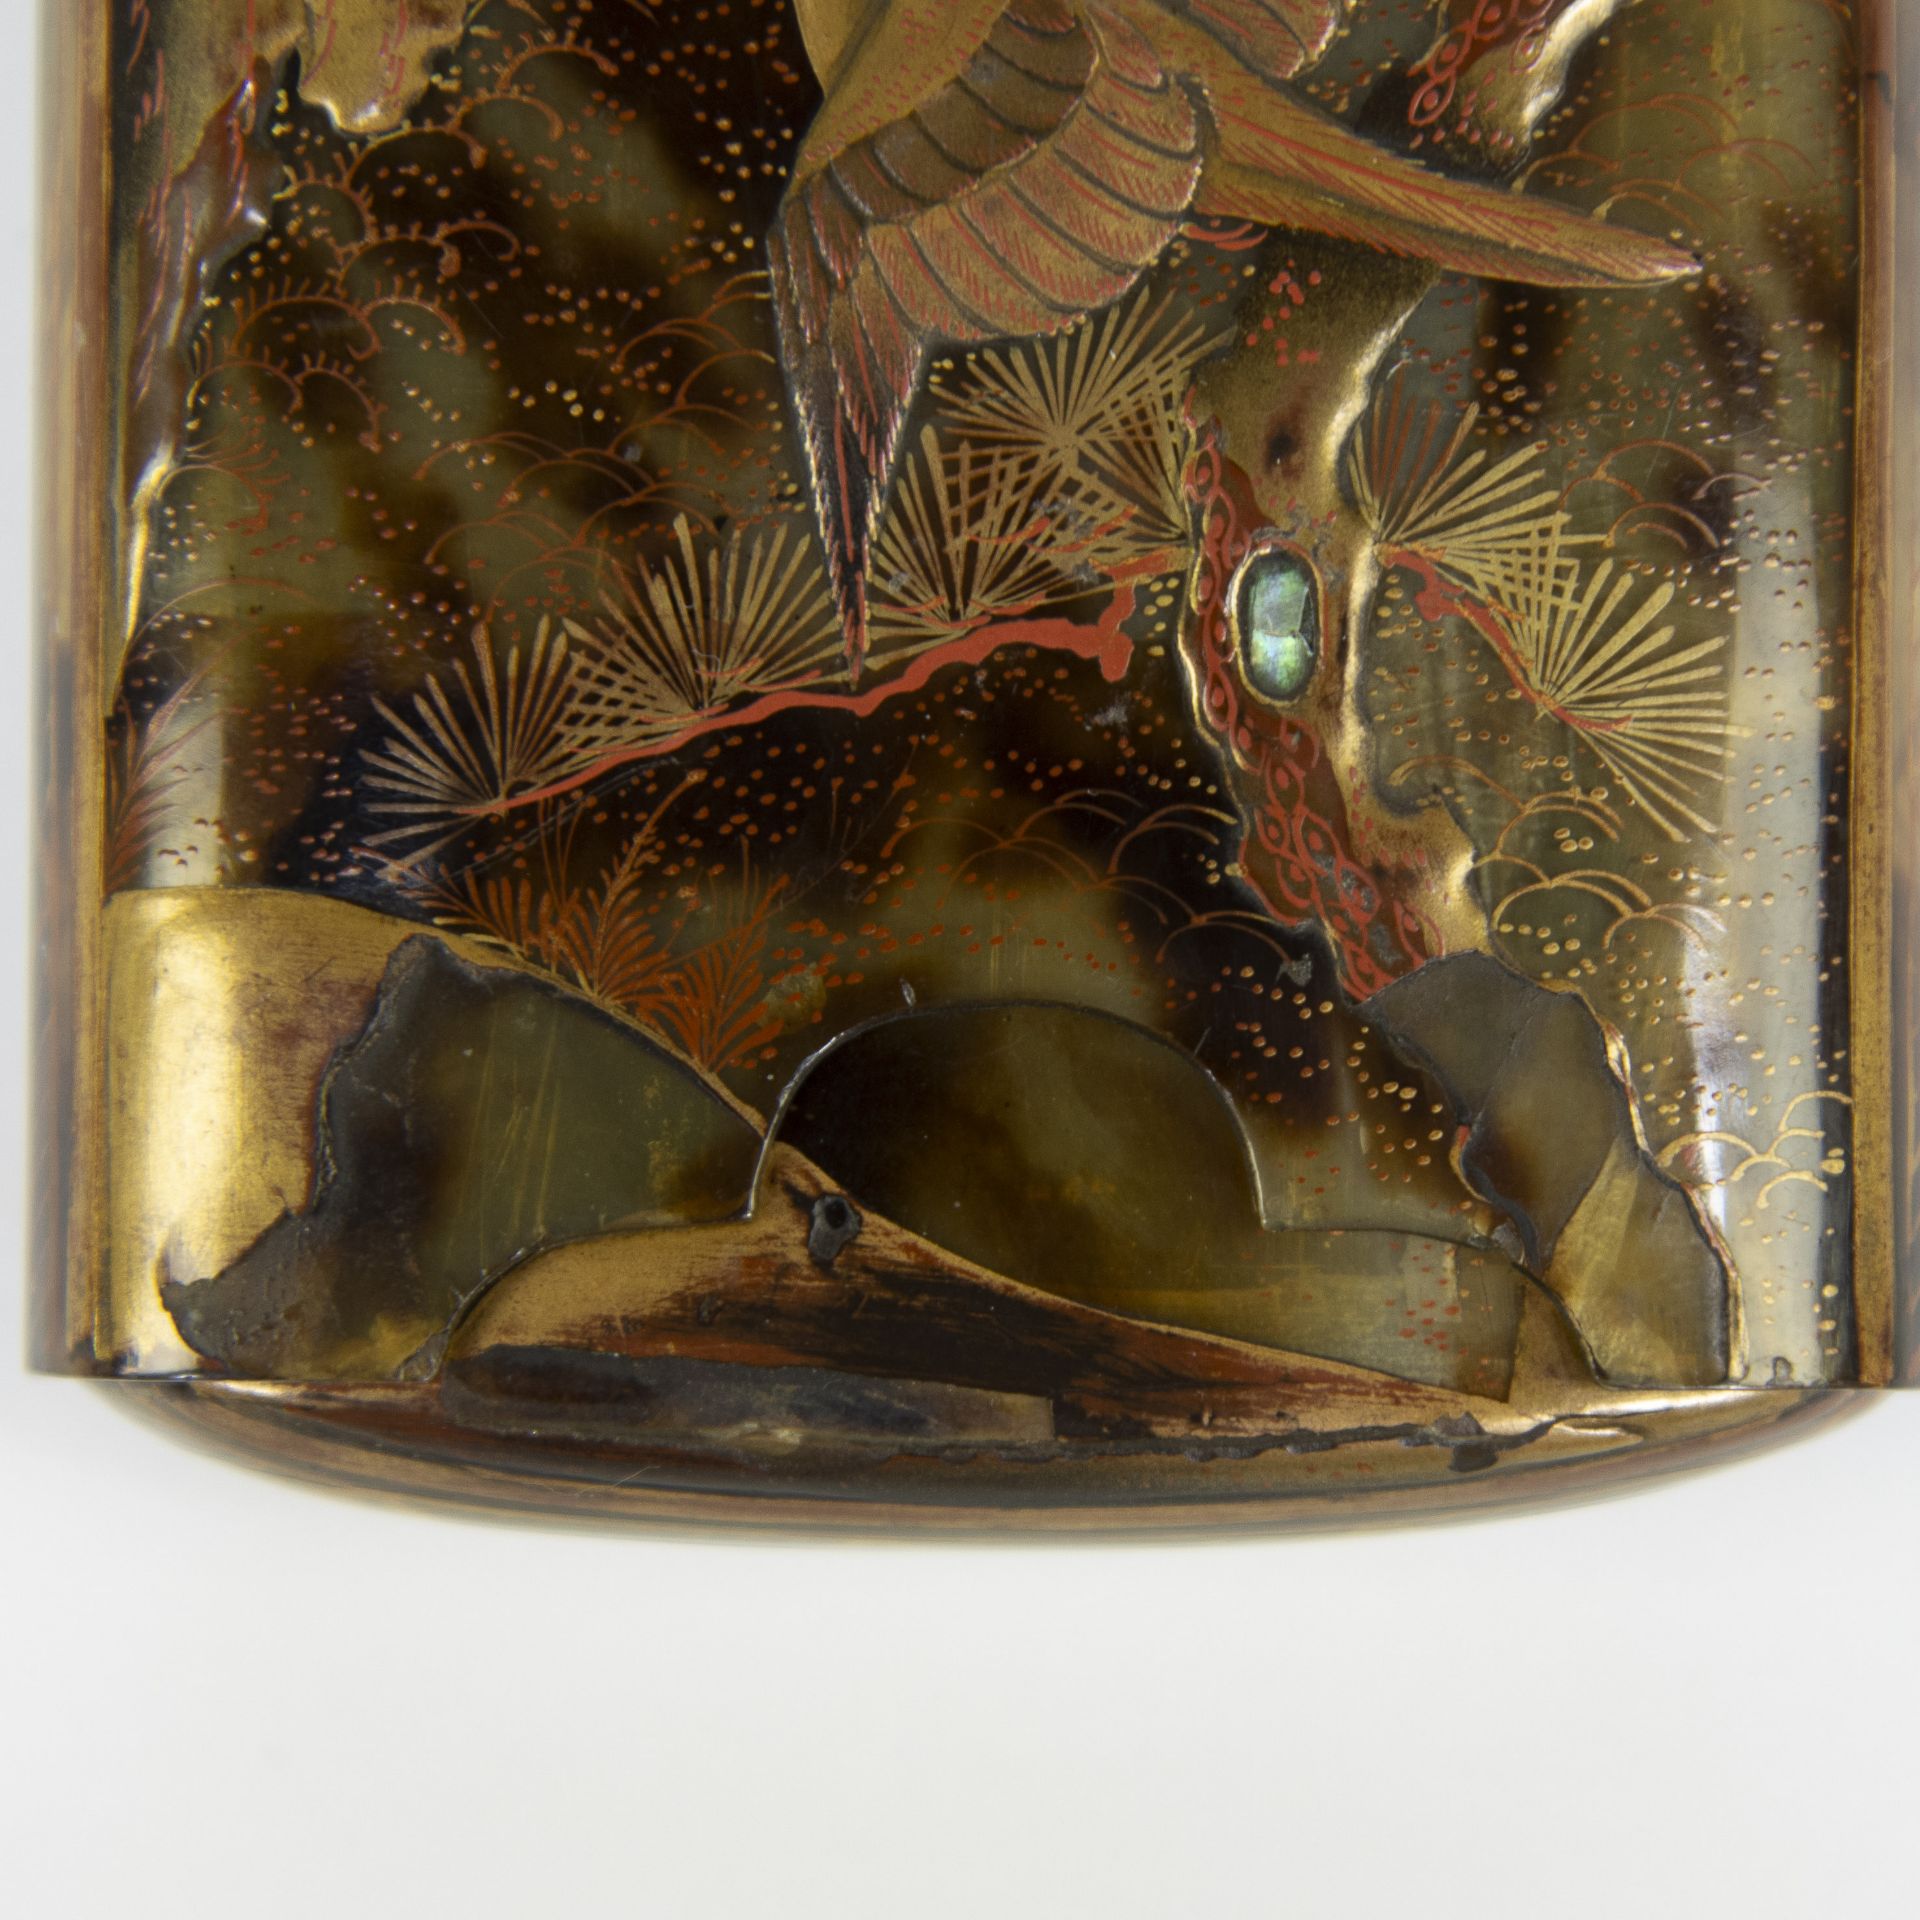 A Japanese Meiji period lacquered tortoiseshell cigar case decorated with cranes and birds in a land - Bild 3 aus 7